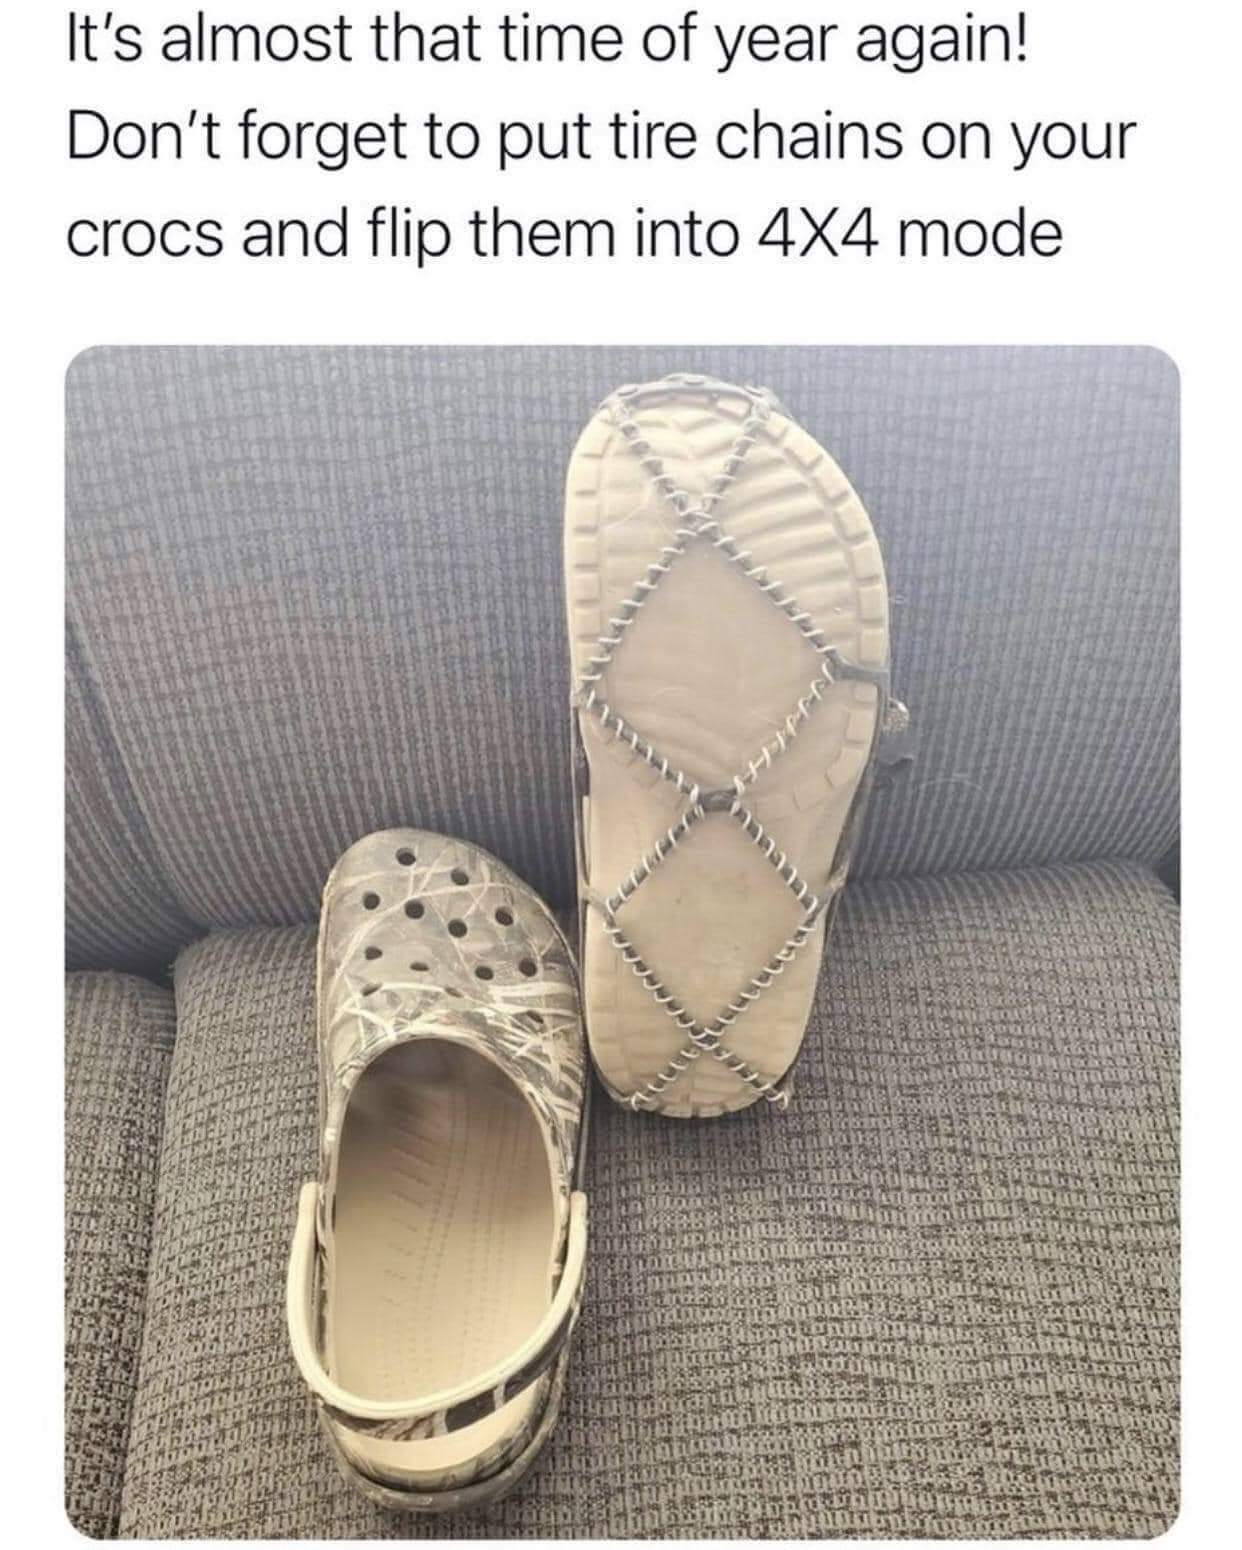 dank memes - funny memes - croc tire chains - It's almost that time of year again! Don't forget to put tire chains on your crocs and flip them into 4X4 mode ter